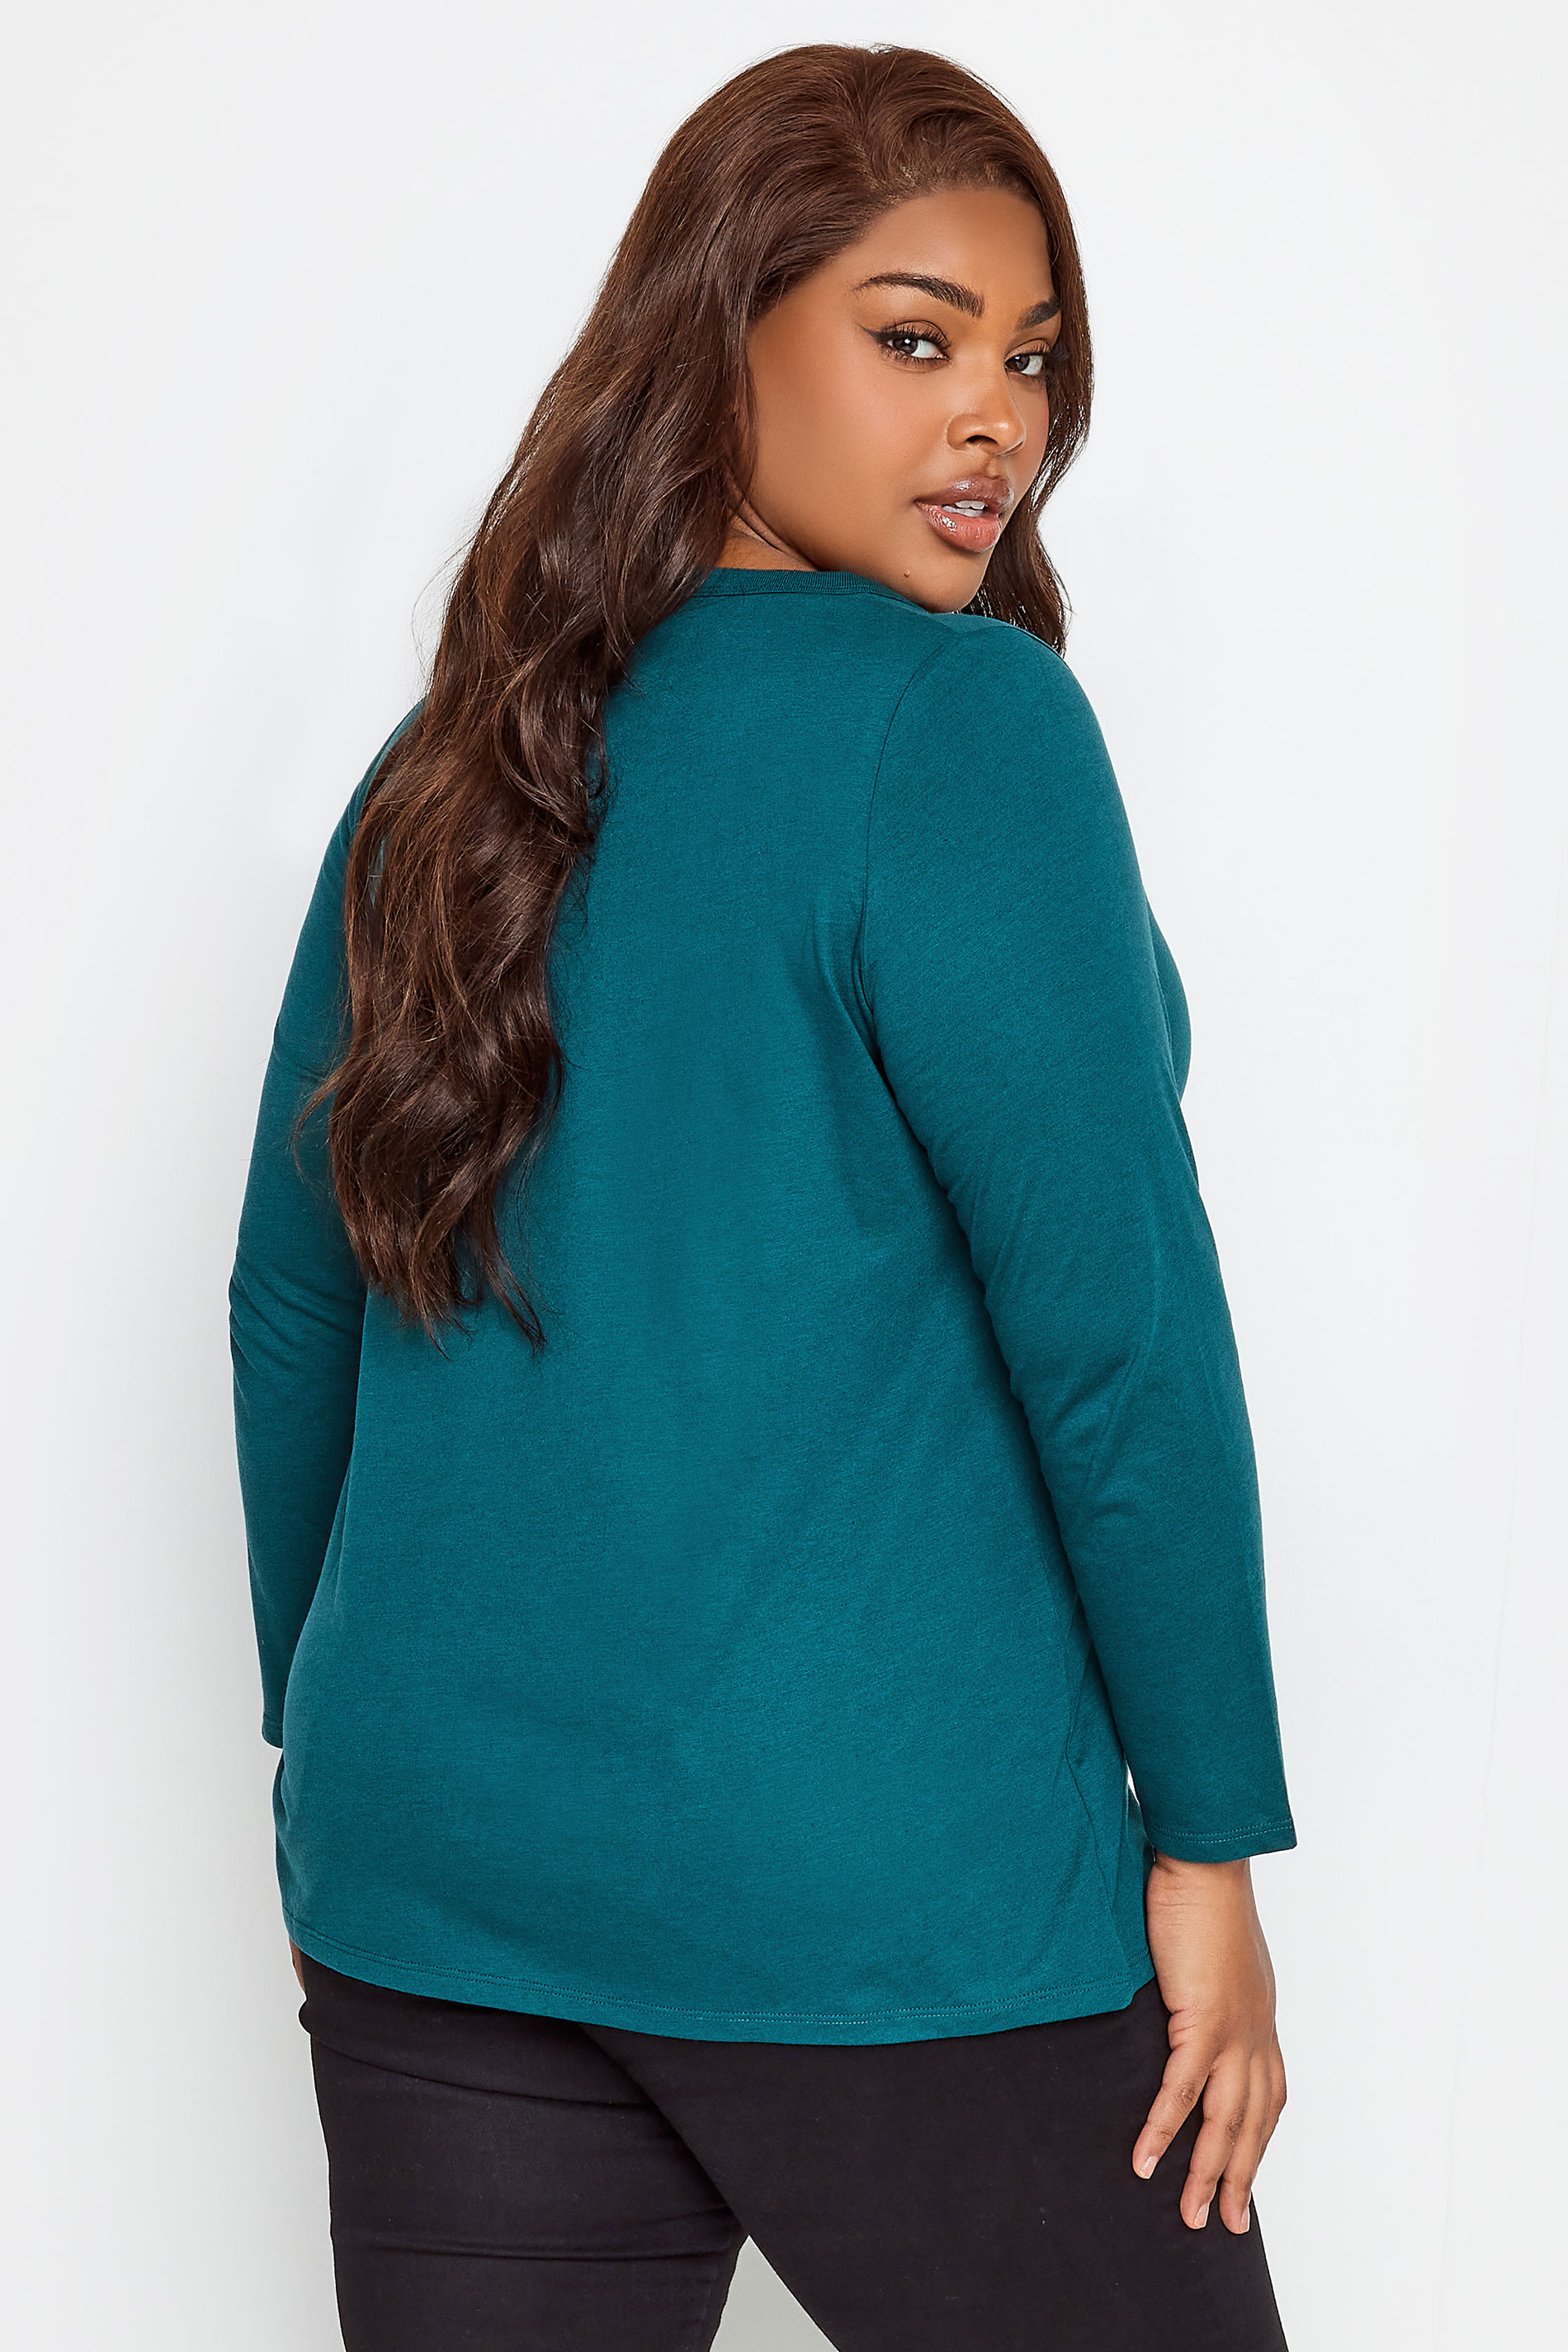 YOURS Curve Plus Size Teal Blue Long Sleeve Basic Top | Yours Clothing  3